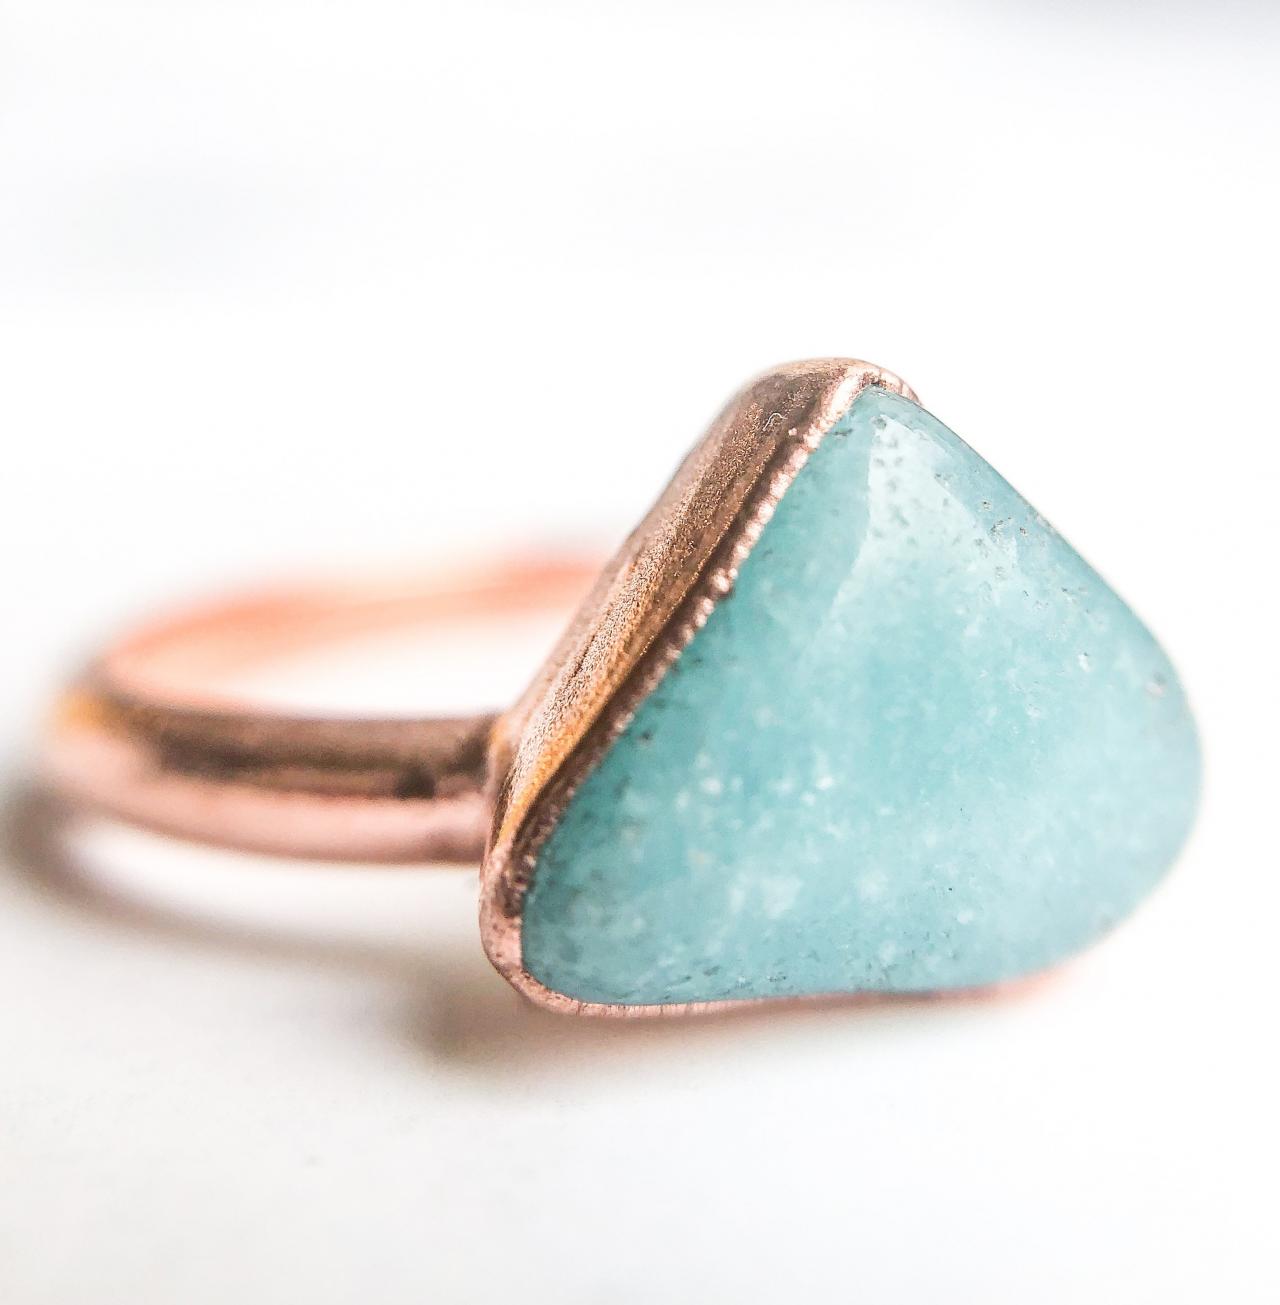 Raw Amazonite Ring, Silver, Gold, Rose Gold Rings